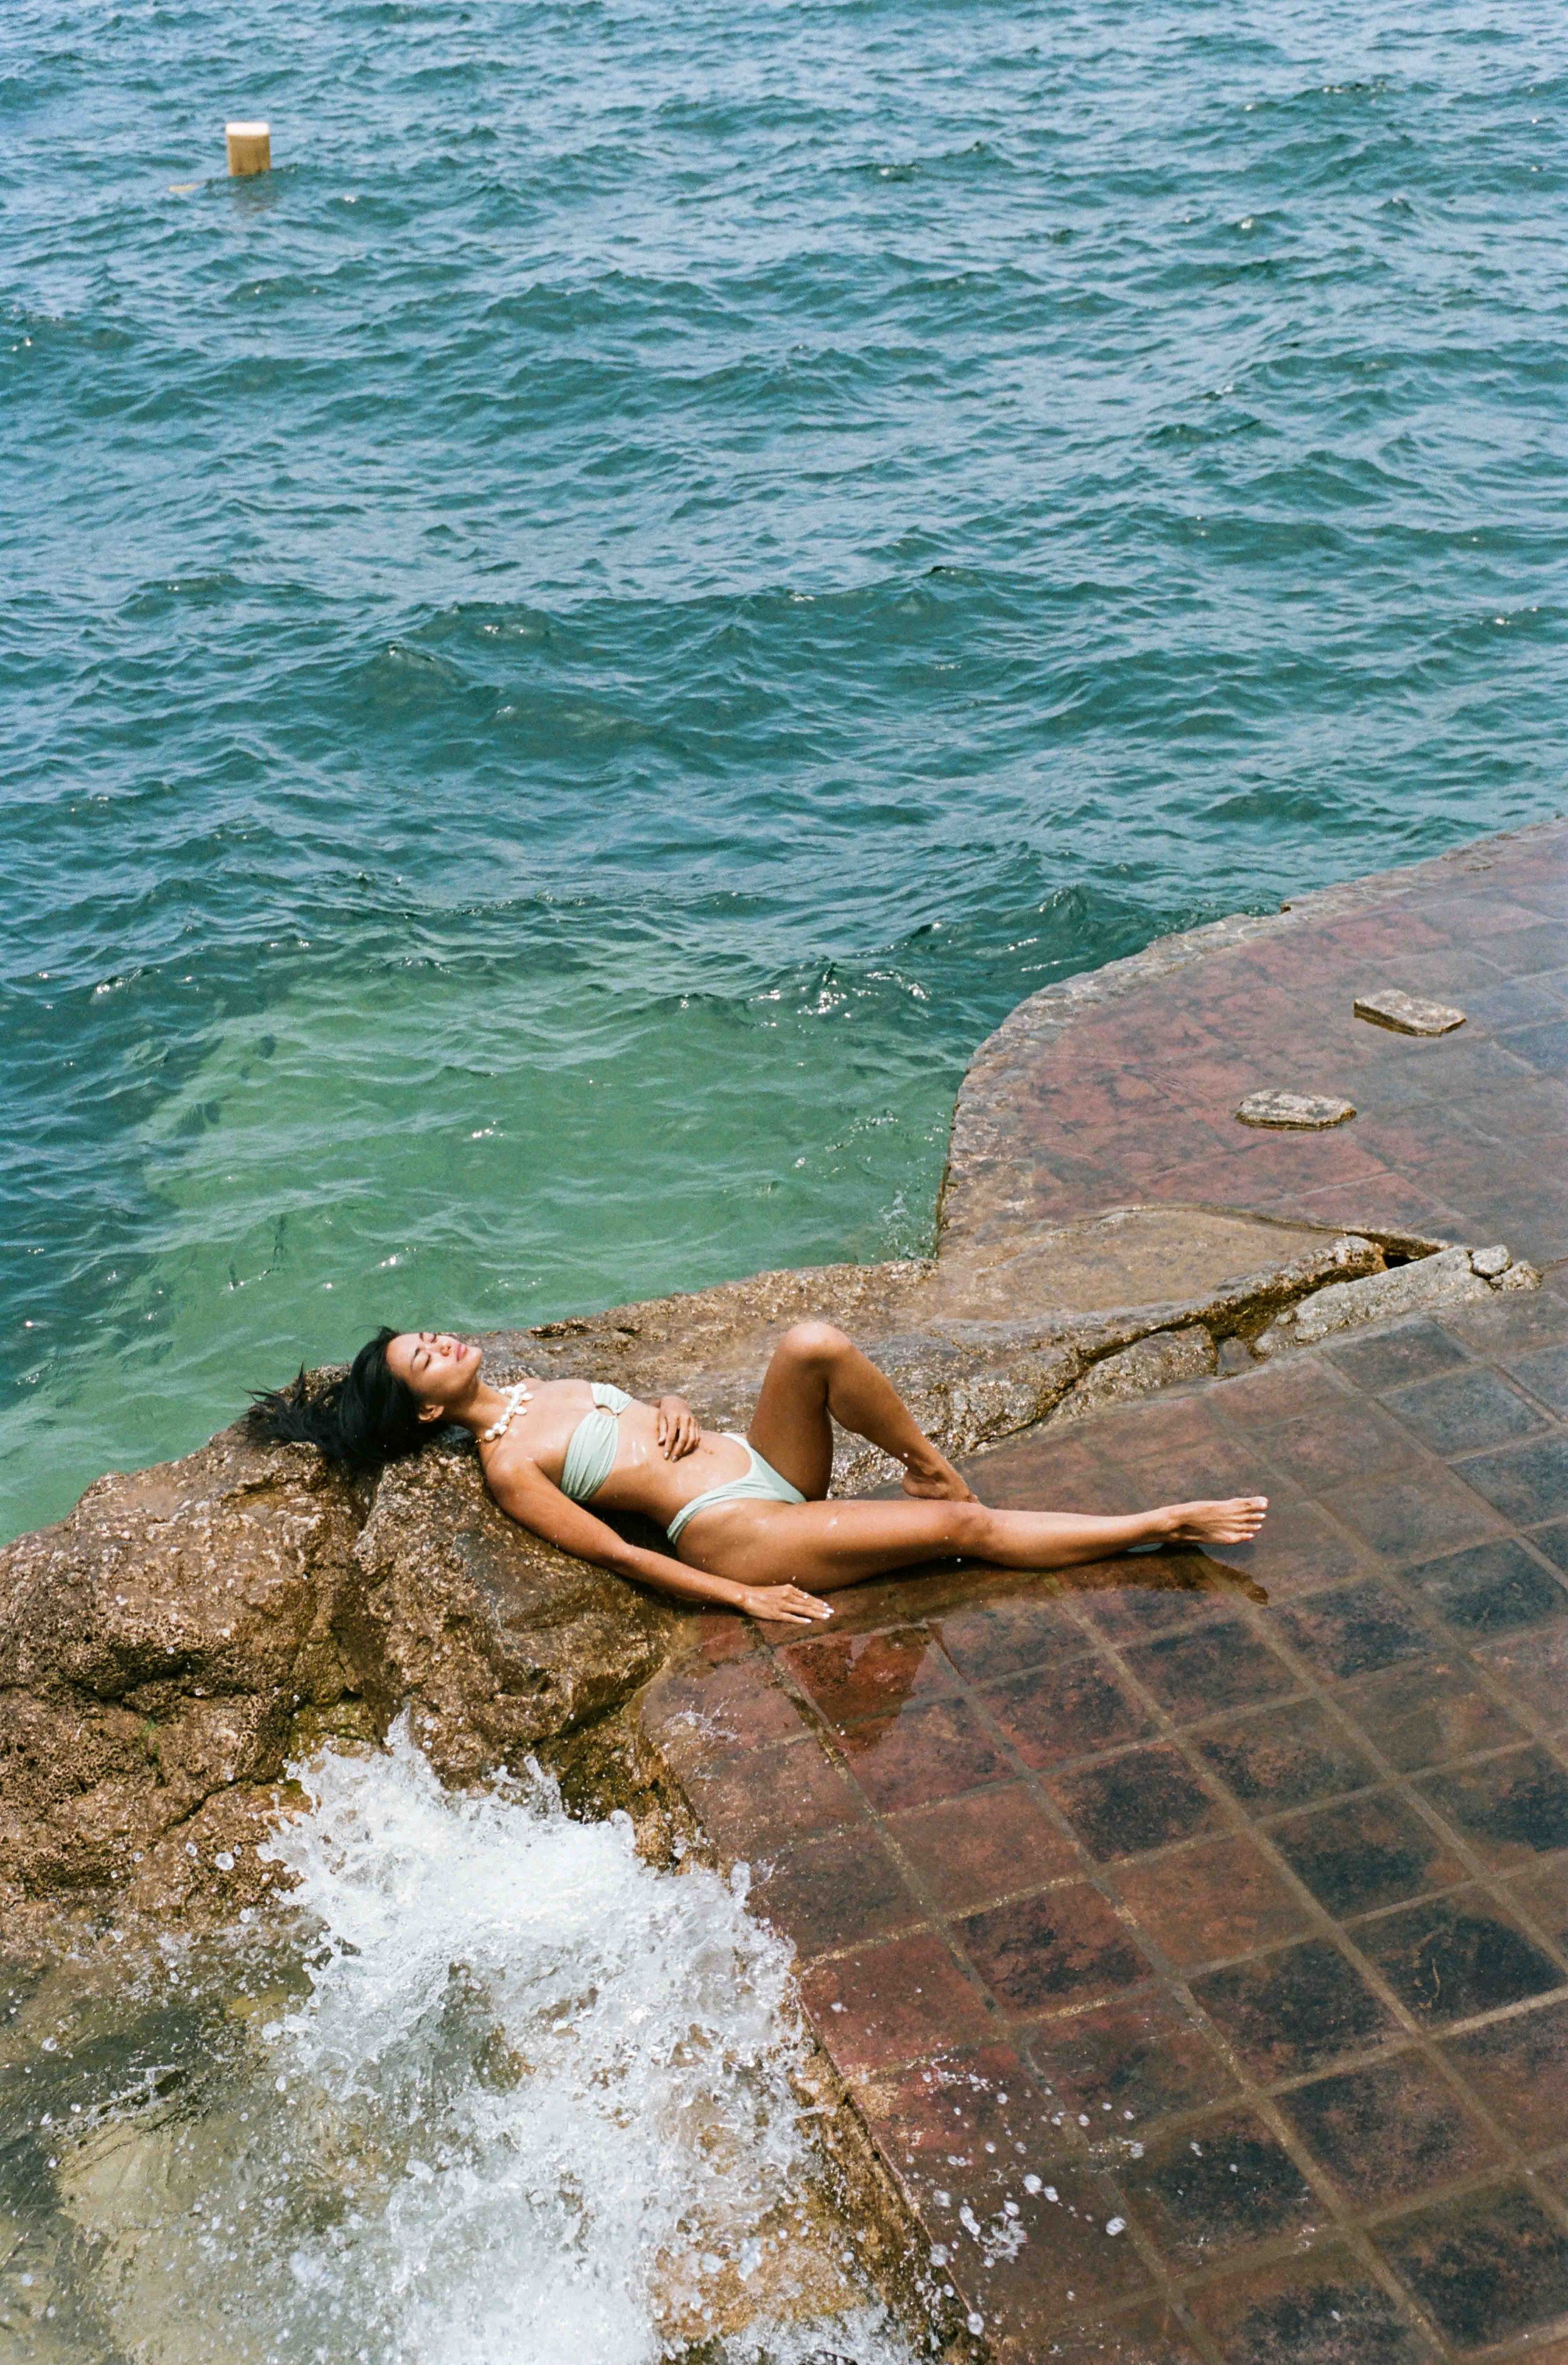  35mm film photos captured by photographer Susan Berry (BerryFace) in Lake Atitlan, Guatemala for Gooseberry Intimates.  Susan Berry produced the photoshoot remotely for the swimwear and lingerie brand and traveled to the location to capture a pictur